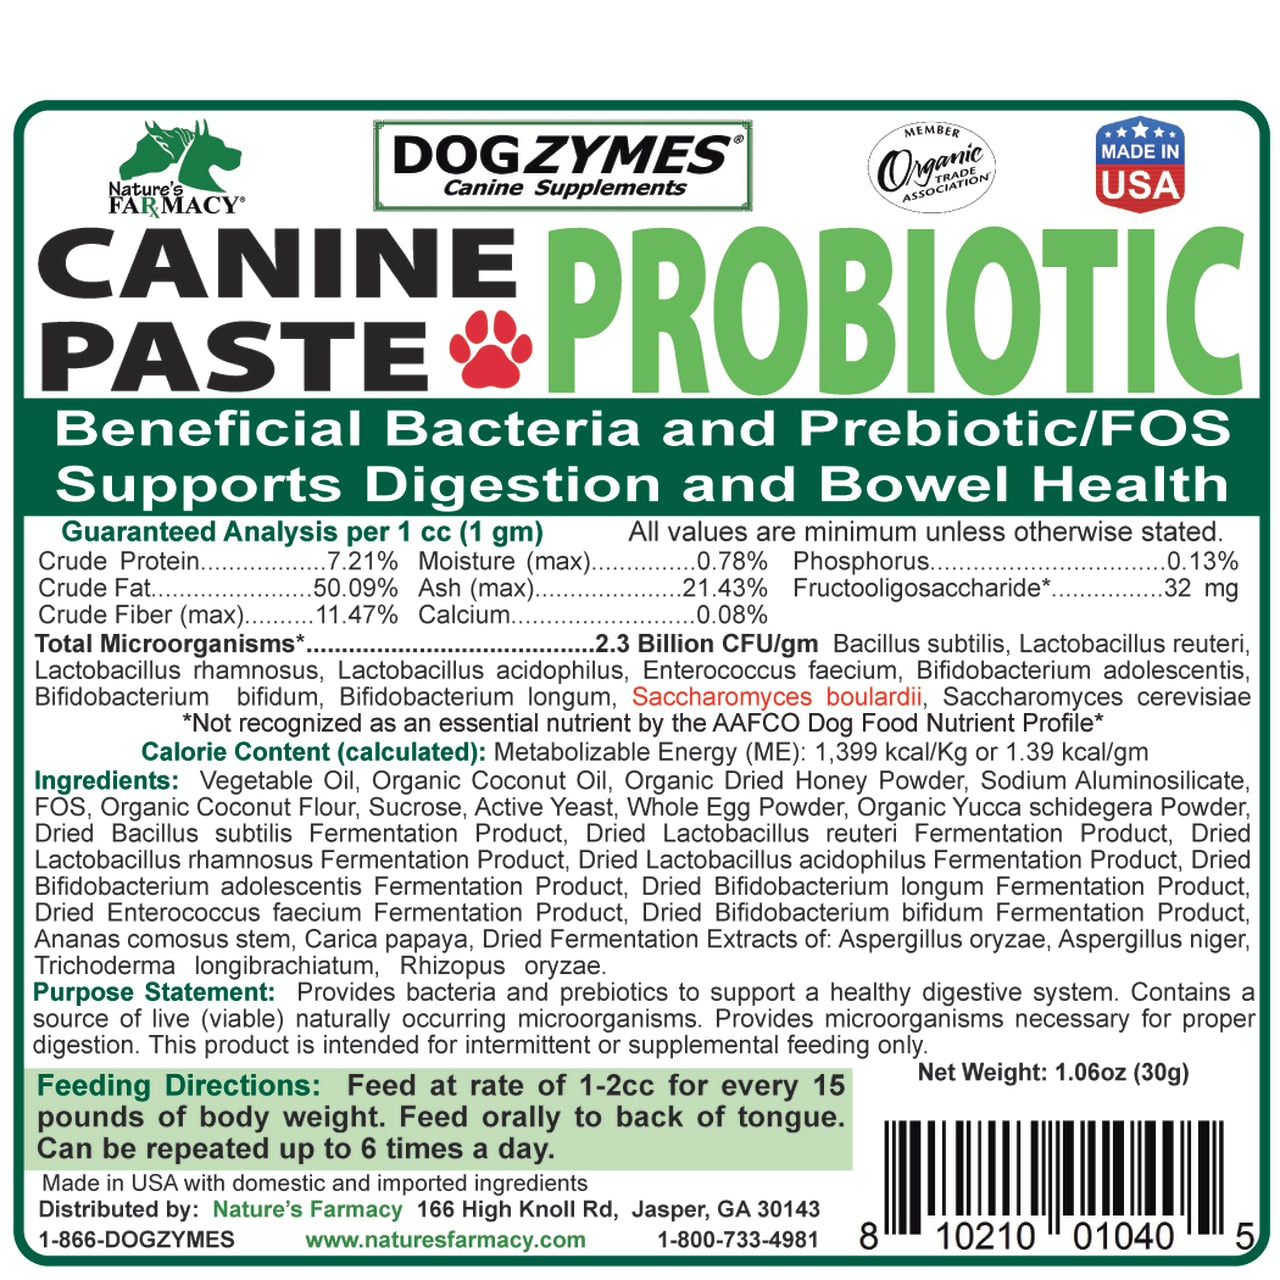 Nature's Farmacy Dogzymes Canine Probiotic Paste For Dogs